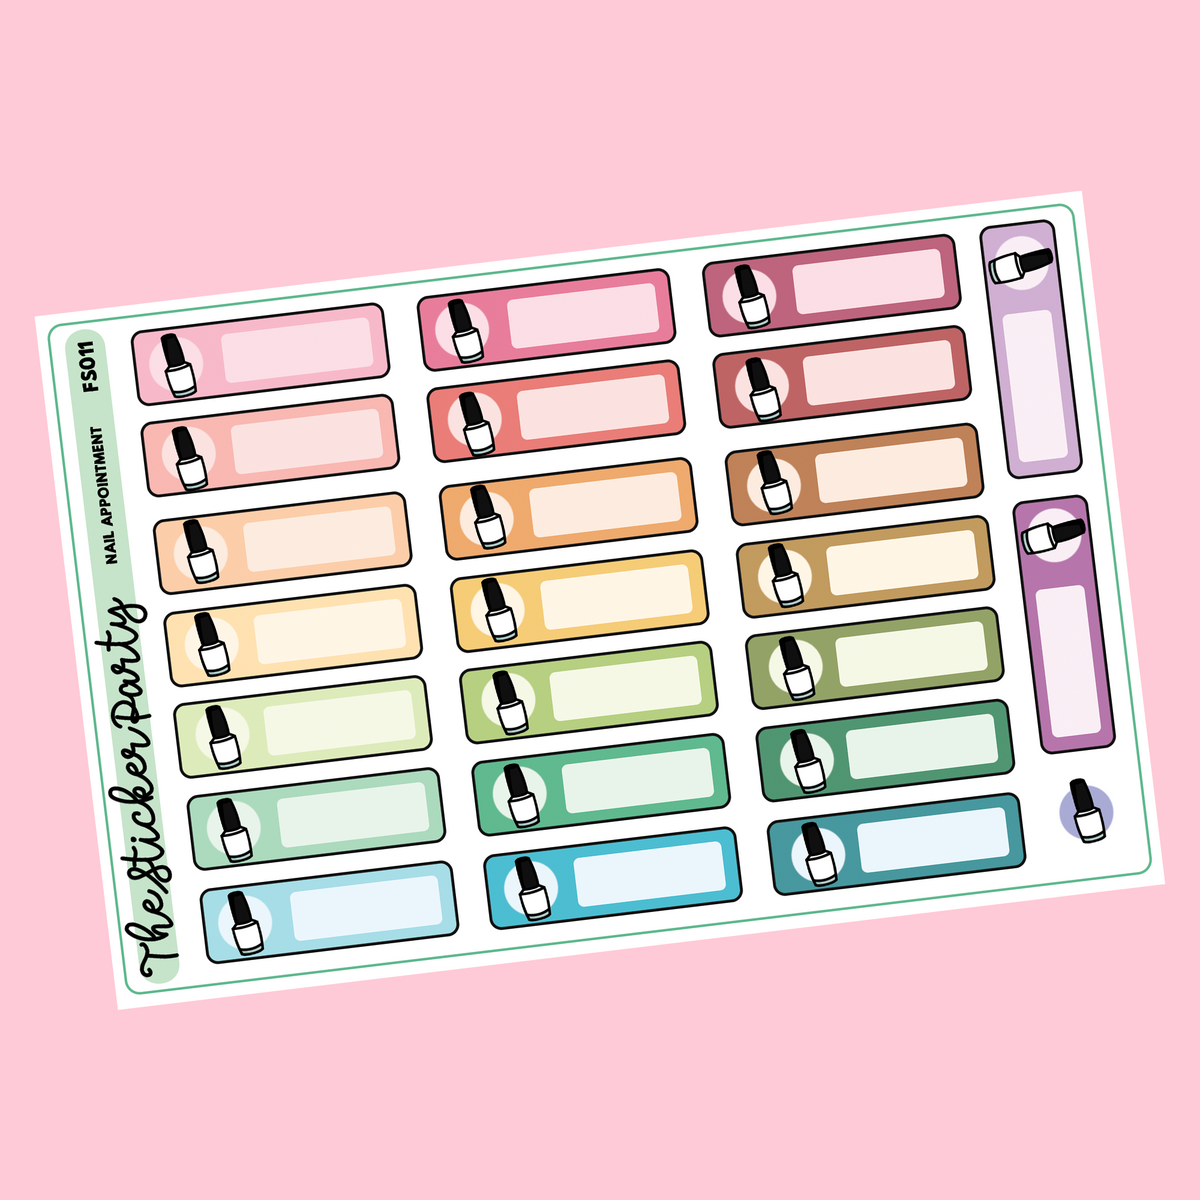  Nails Planner Appointment / 54 Fun Vinyl Stickers (1/2”) /  Manicure Salon Day/Beauty Self Care Me Time/Essential Productivity Life  Planner Stickers/Bullet Bujo Journal (Matte Vinyl, 1 Sheet) : Handmade  Products